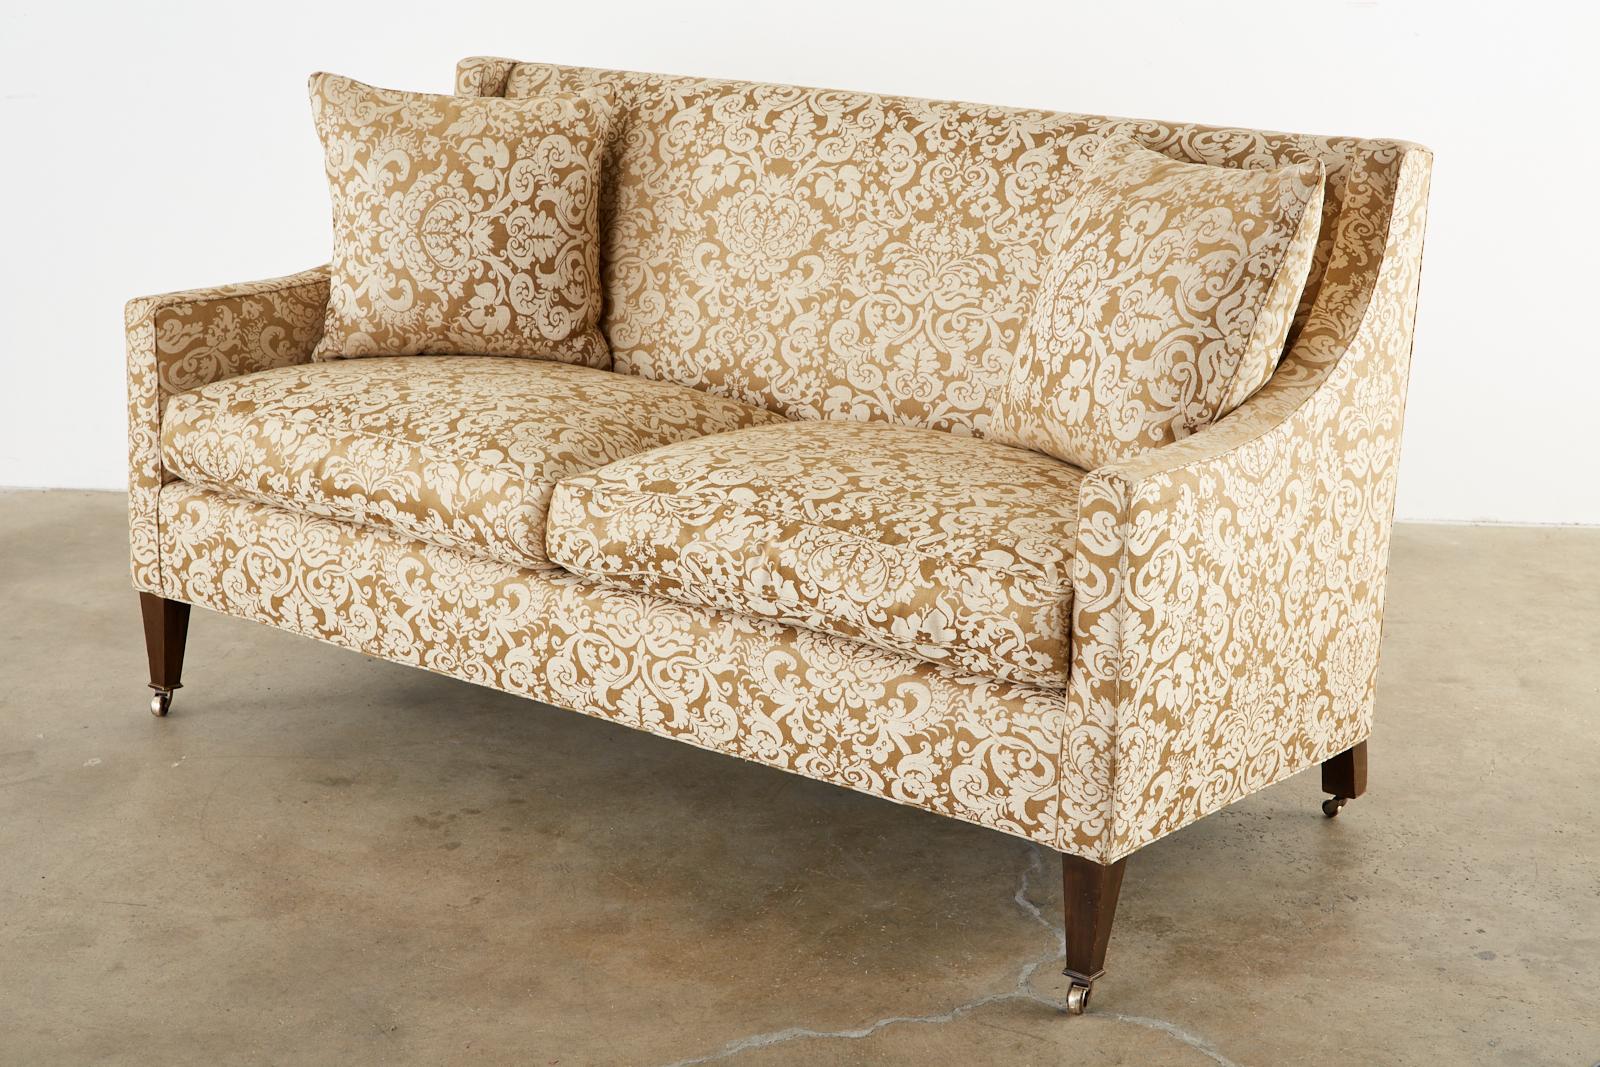 Stylish upholstered modern sofa settee featuring a Fortuny glicine style floral damask fabric by Michael Taylor. The modern settee has a hardwood frame with gracefully curved arms and a flat back. Supported by tapered legs ending with casters. The